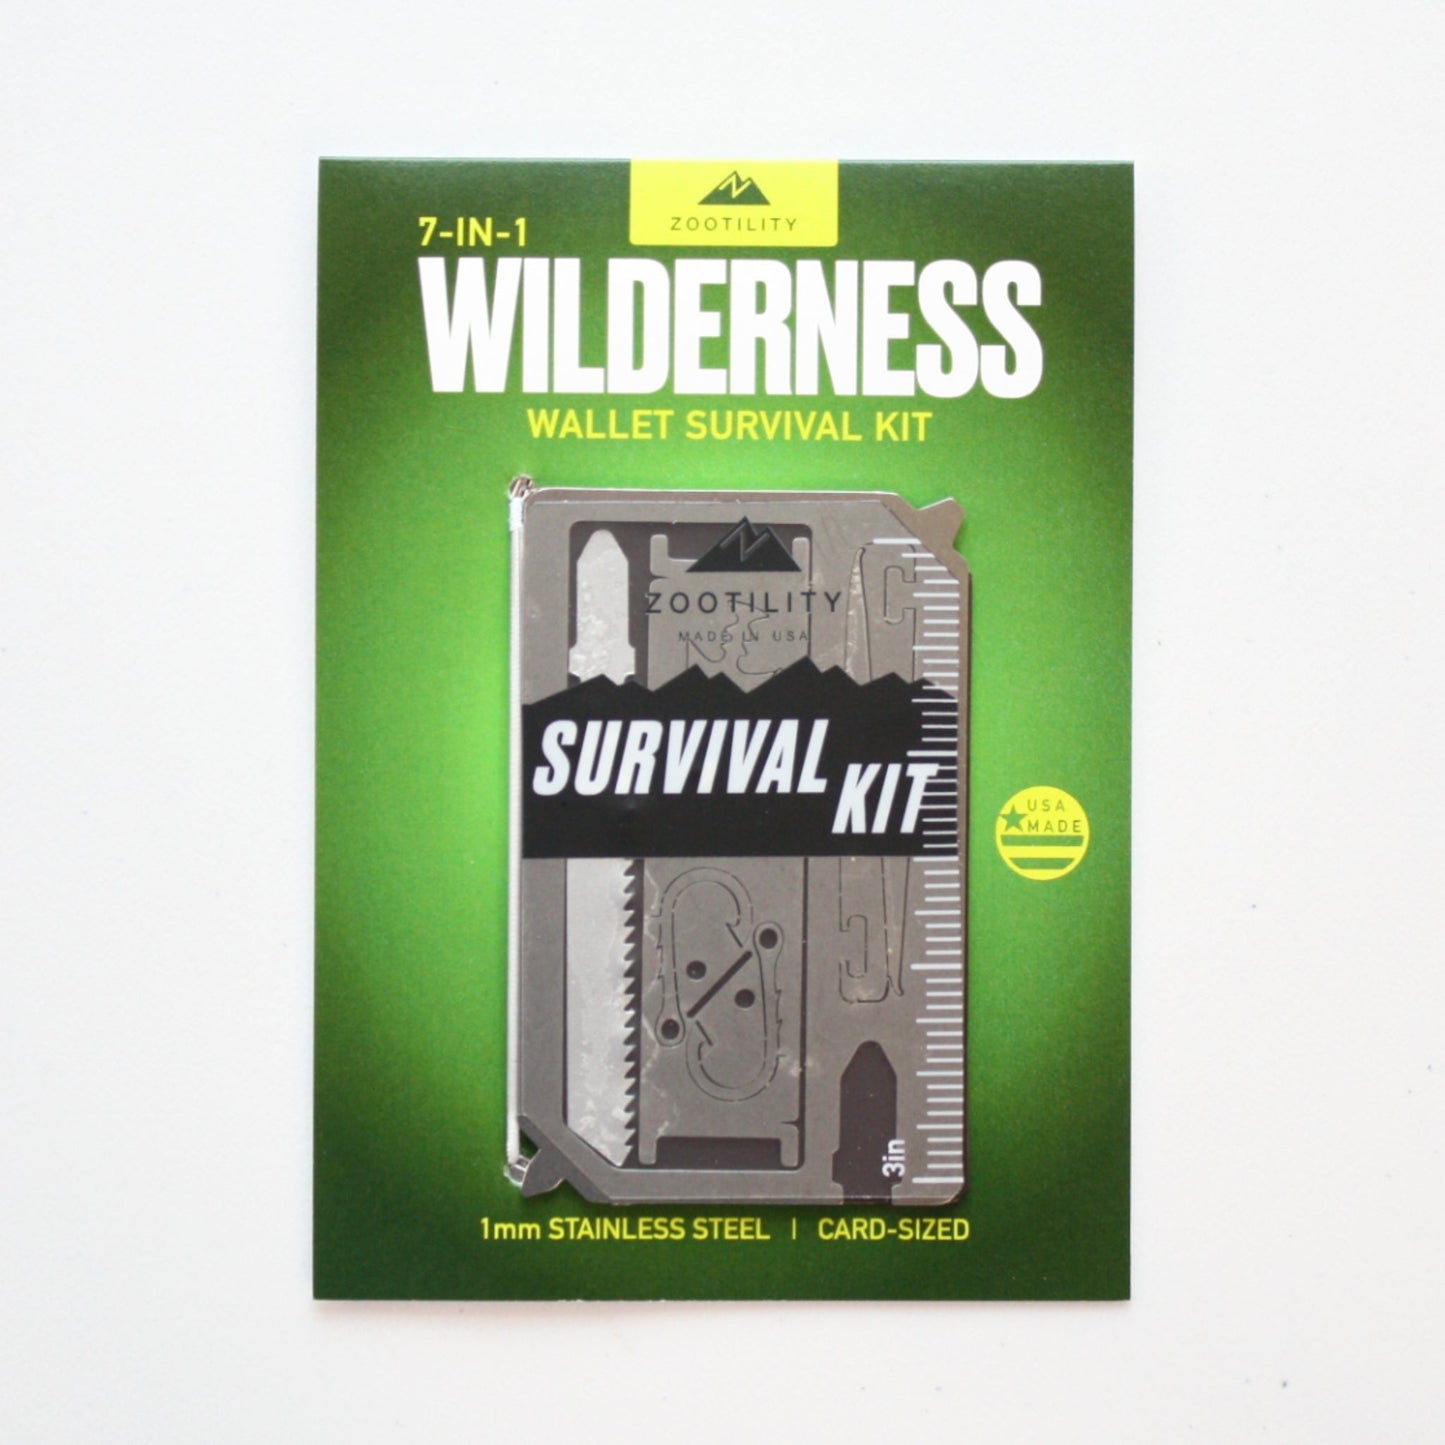 7 items for your repair kit and how to use them - Wilderness Magazine